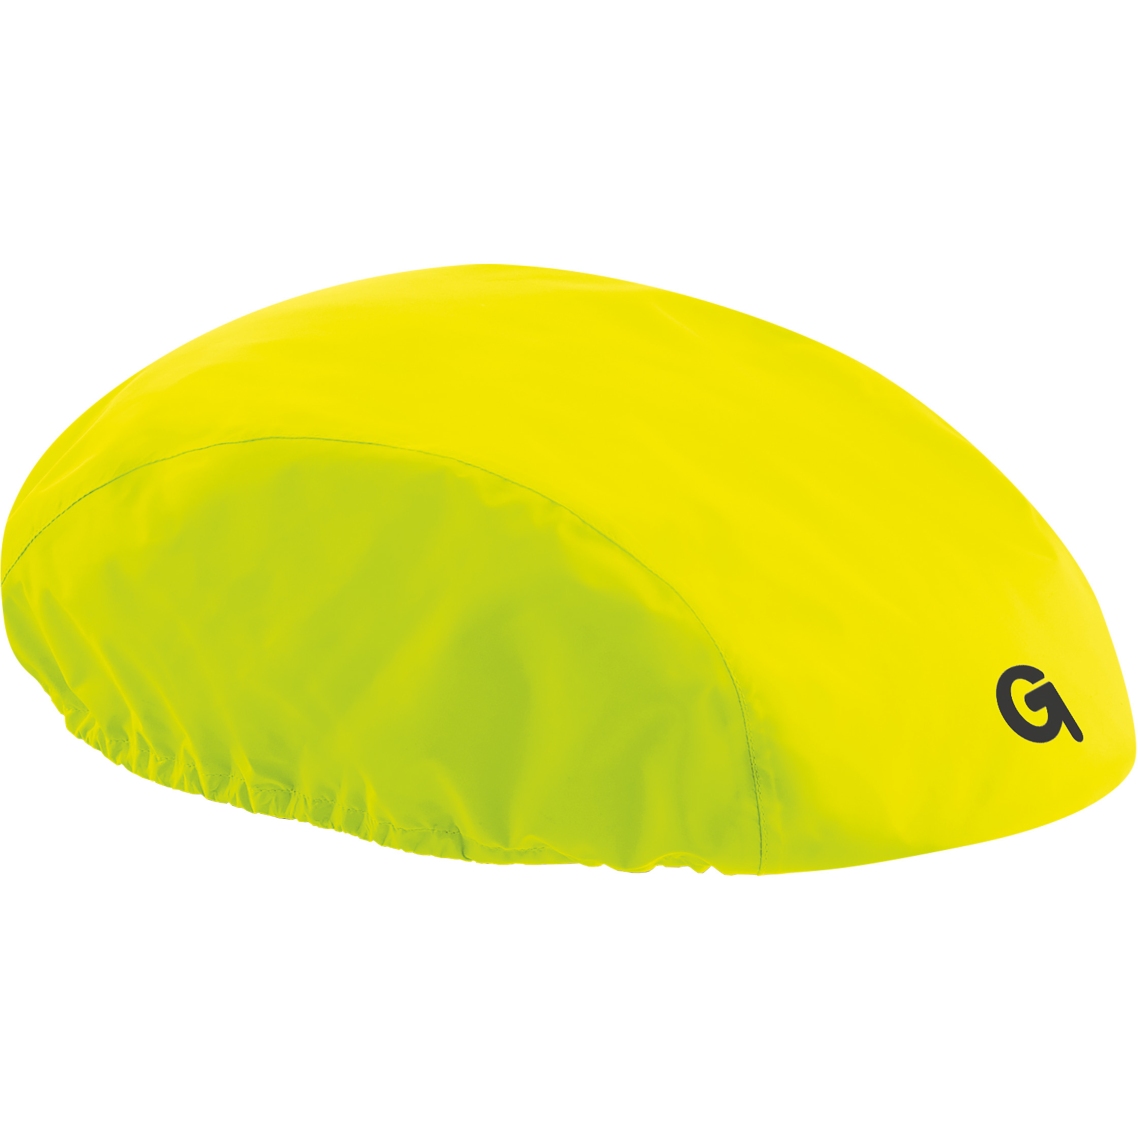 Image of Gonso All-Weather Helmet Cap - Safety Yellow